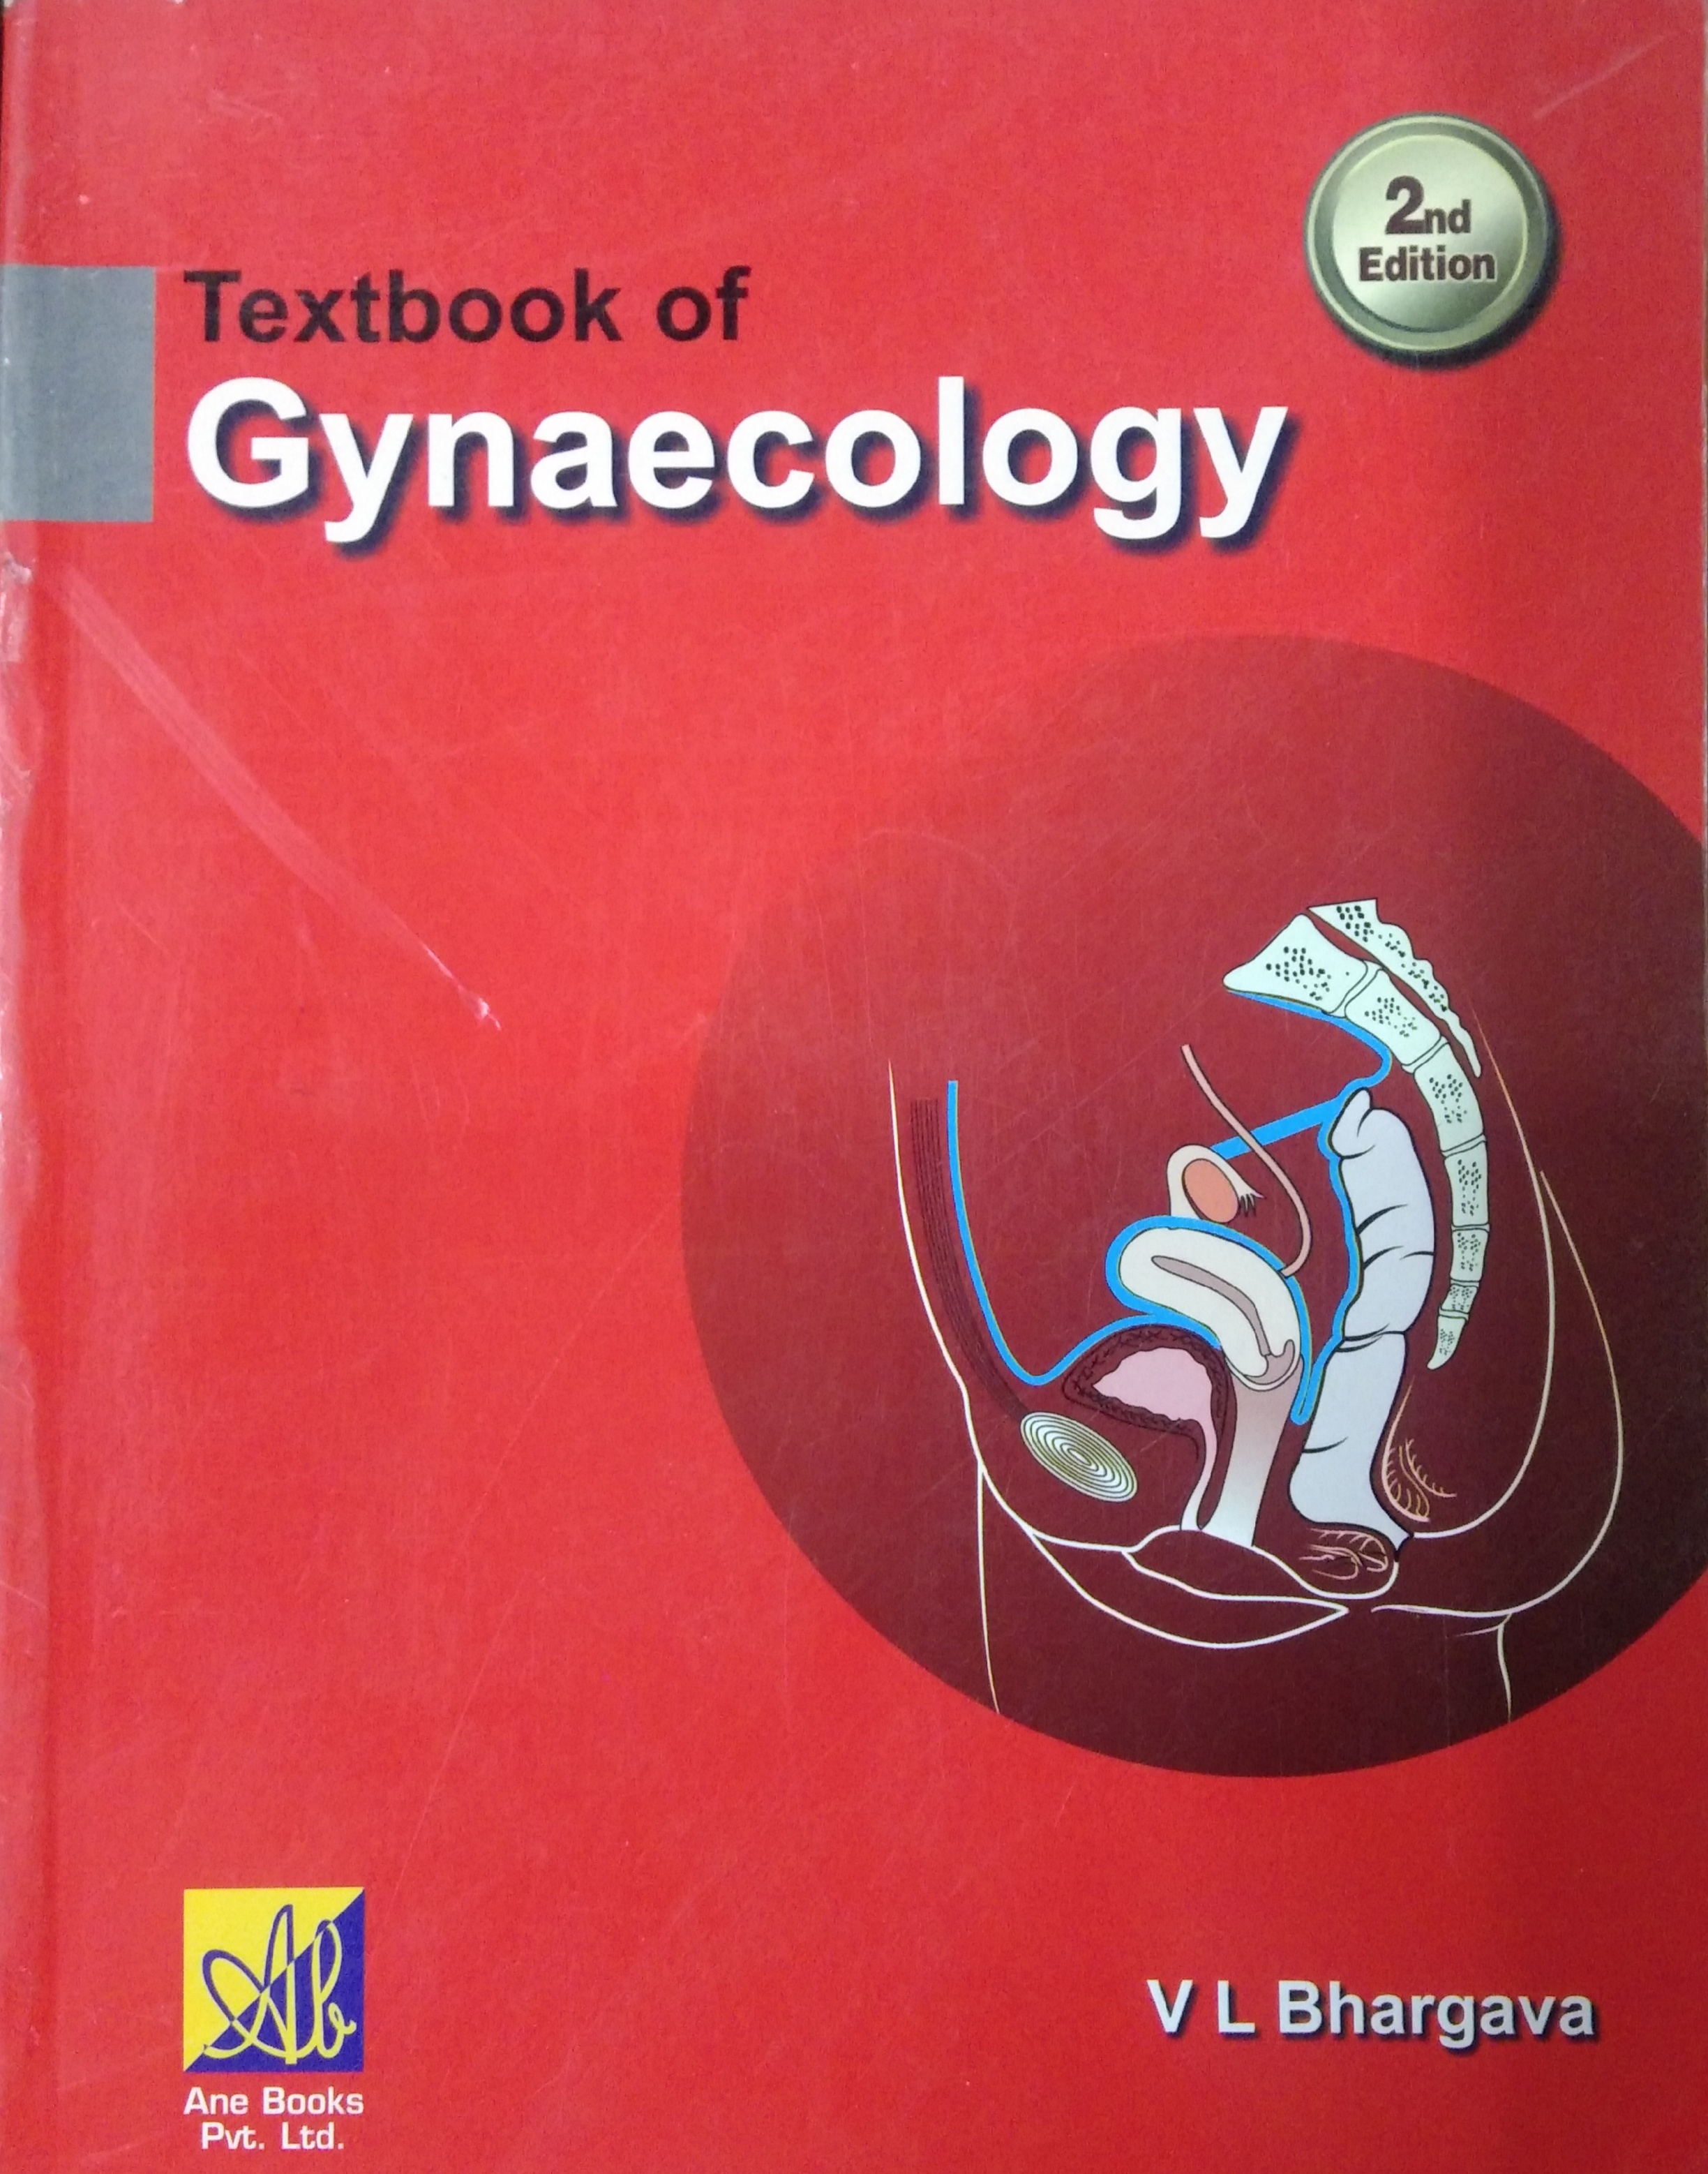 

mbbs/4-year/textbook-of-gynaecology-2ed-9788180522864